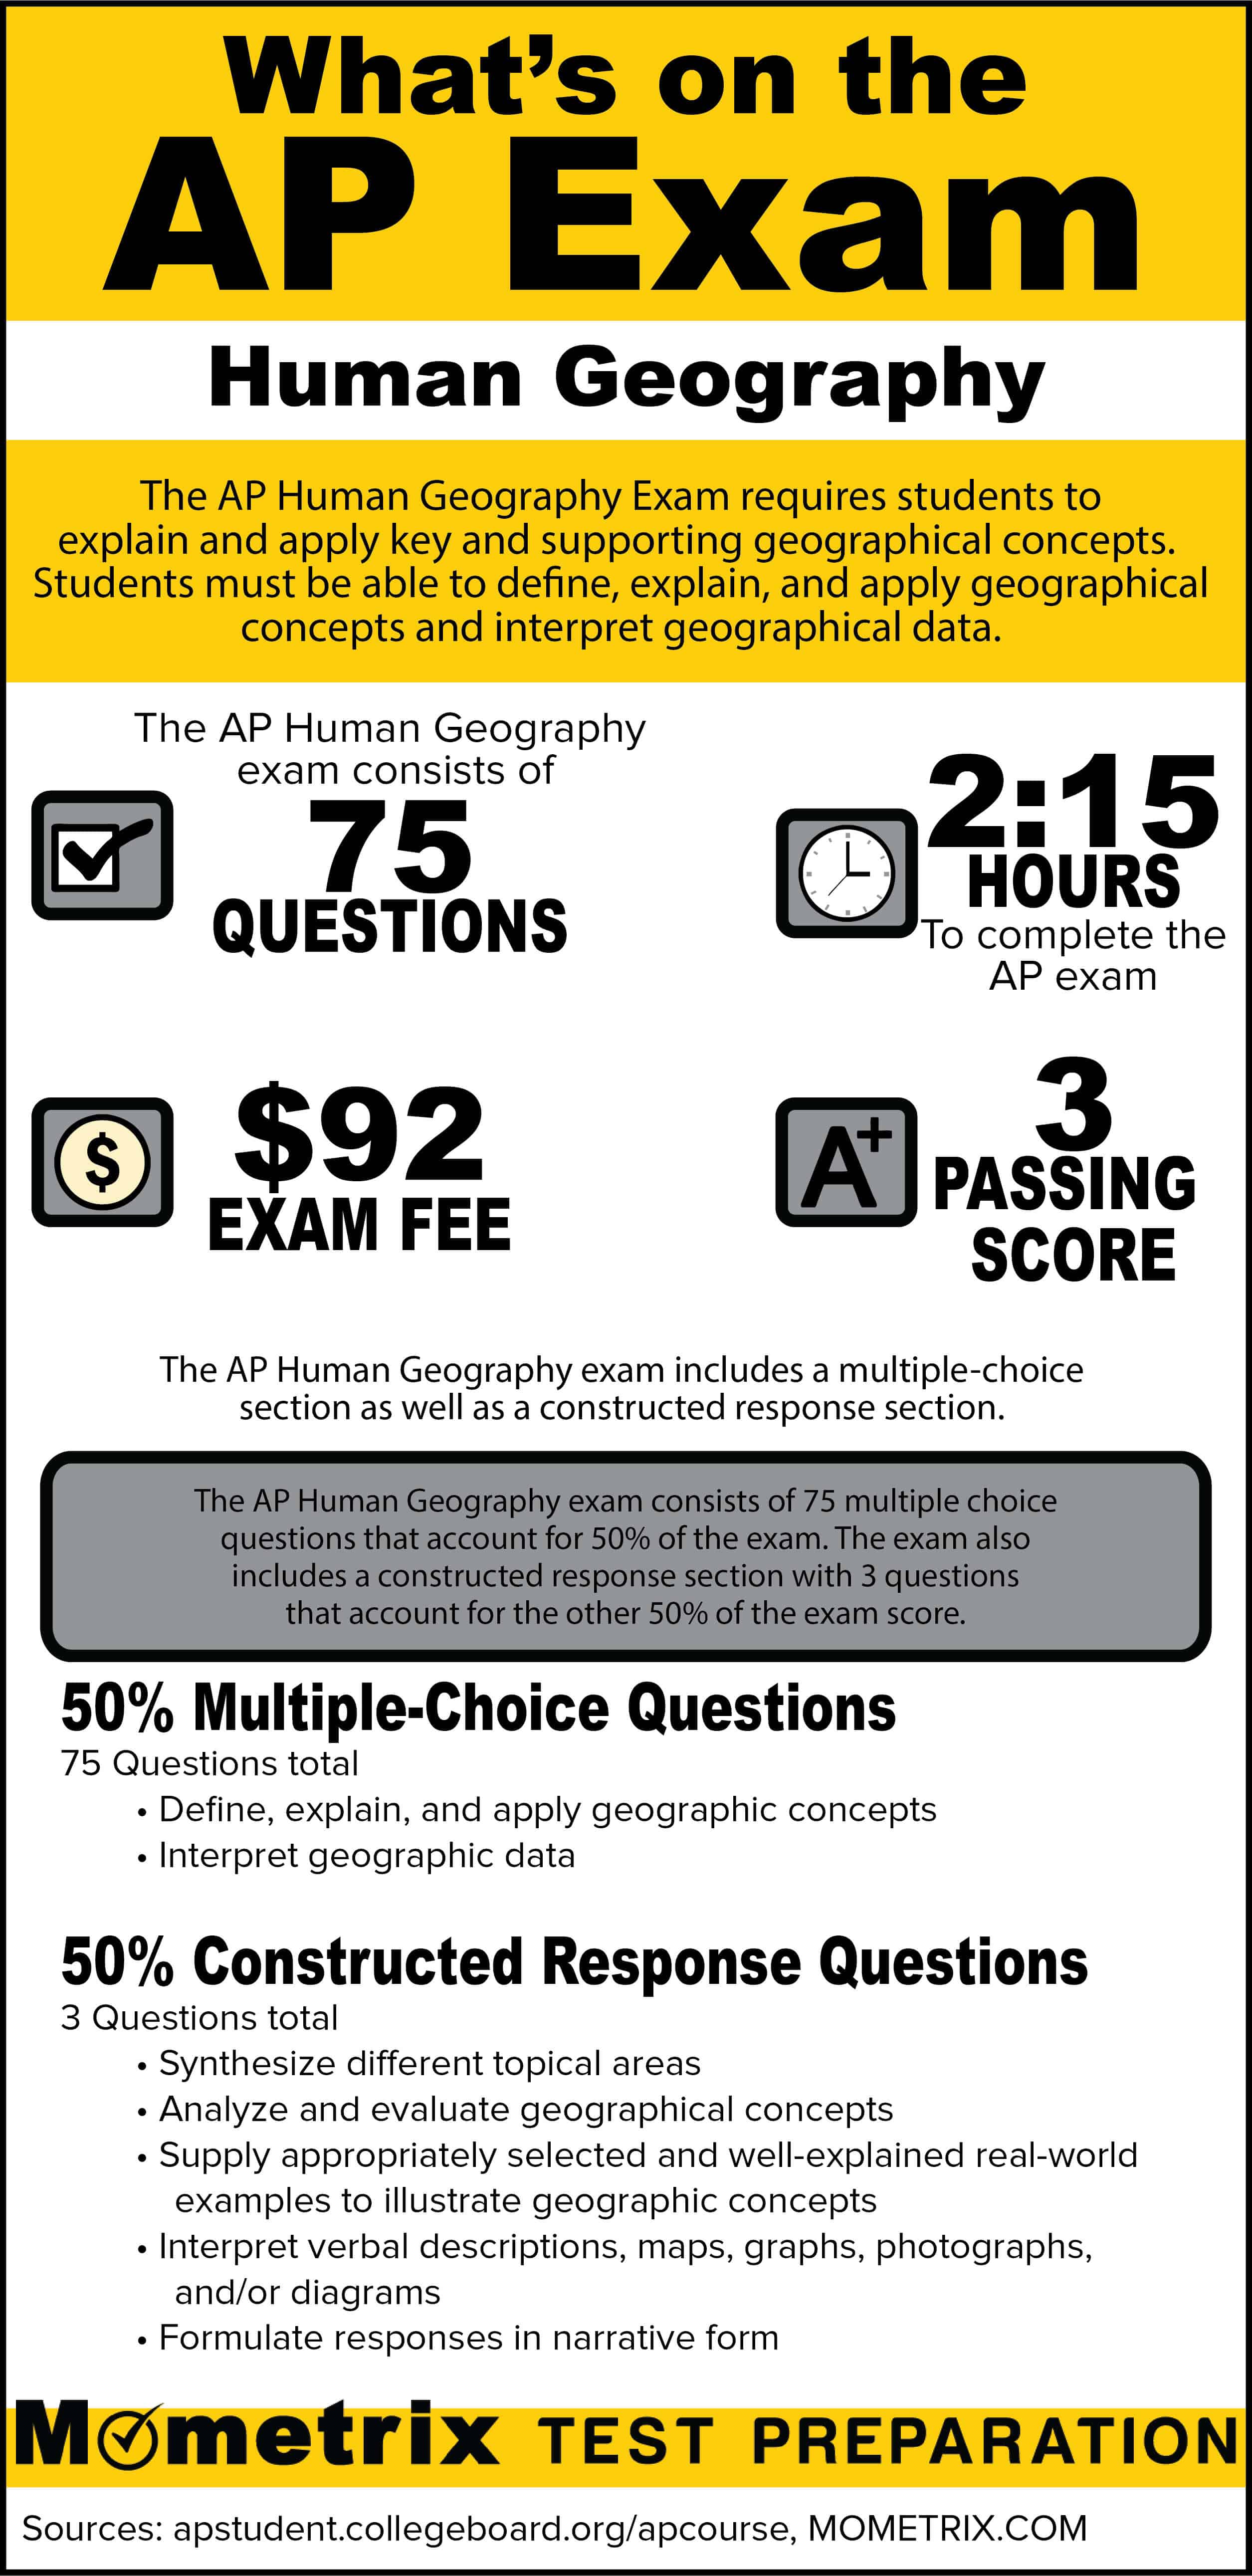 What's on the AP Human Geography